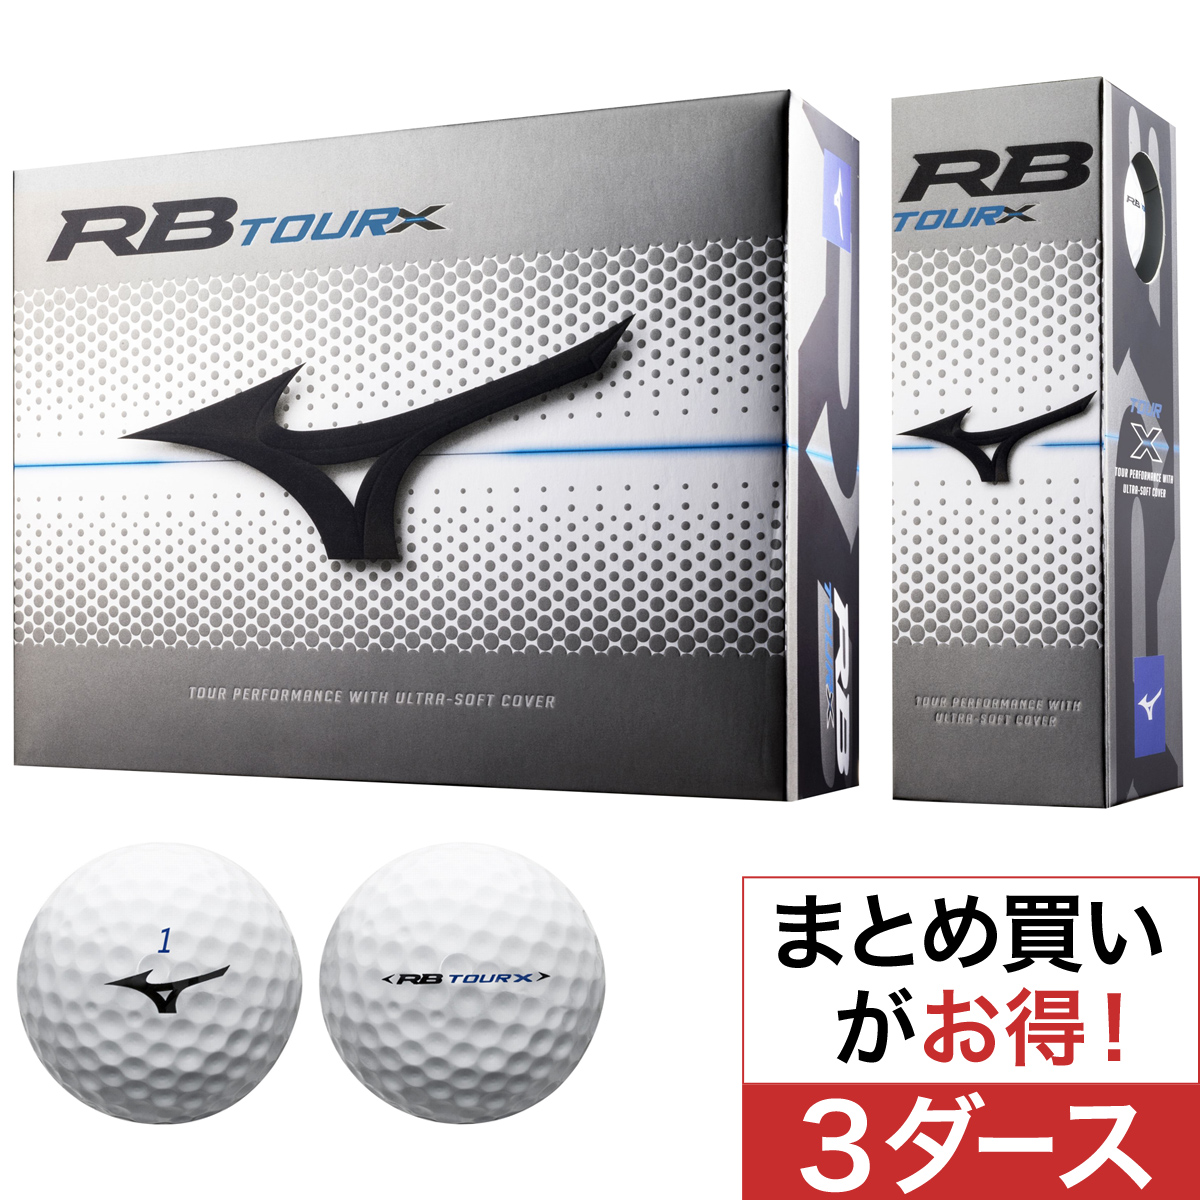  RB TOUR X ボール 3ダースセット 